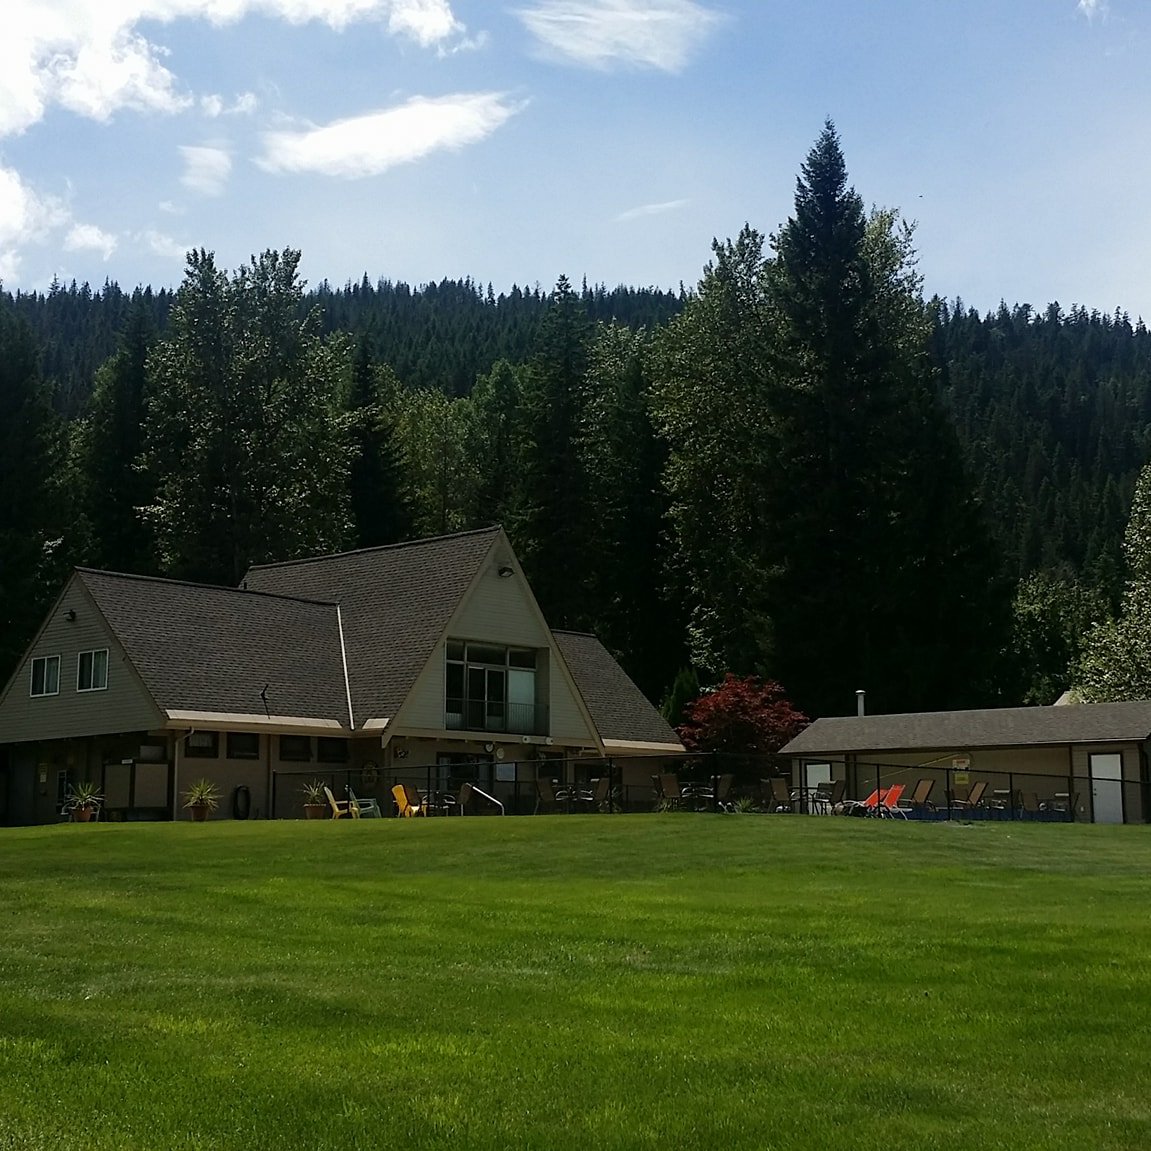 En route to or from Glacier and Banff national parks, the Sicamous KOA makes a fun family getaway. Just off Trans-Canada Highway 1,  Near Shuswap and Mara lakes